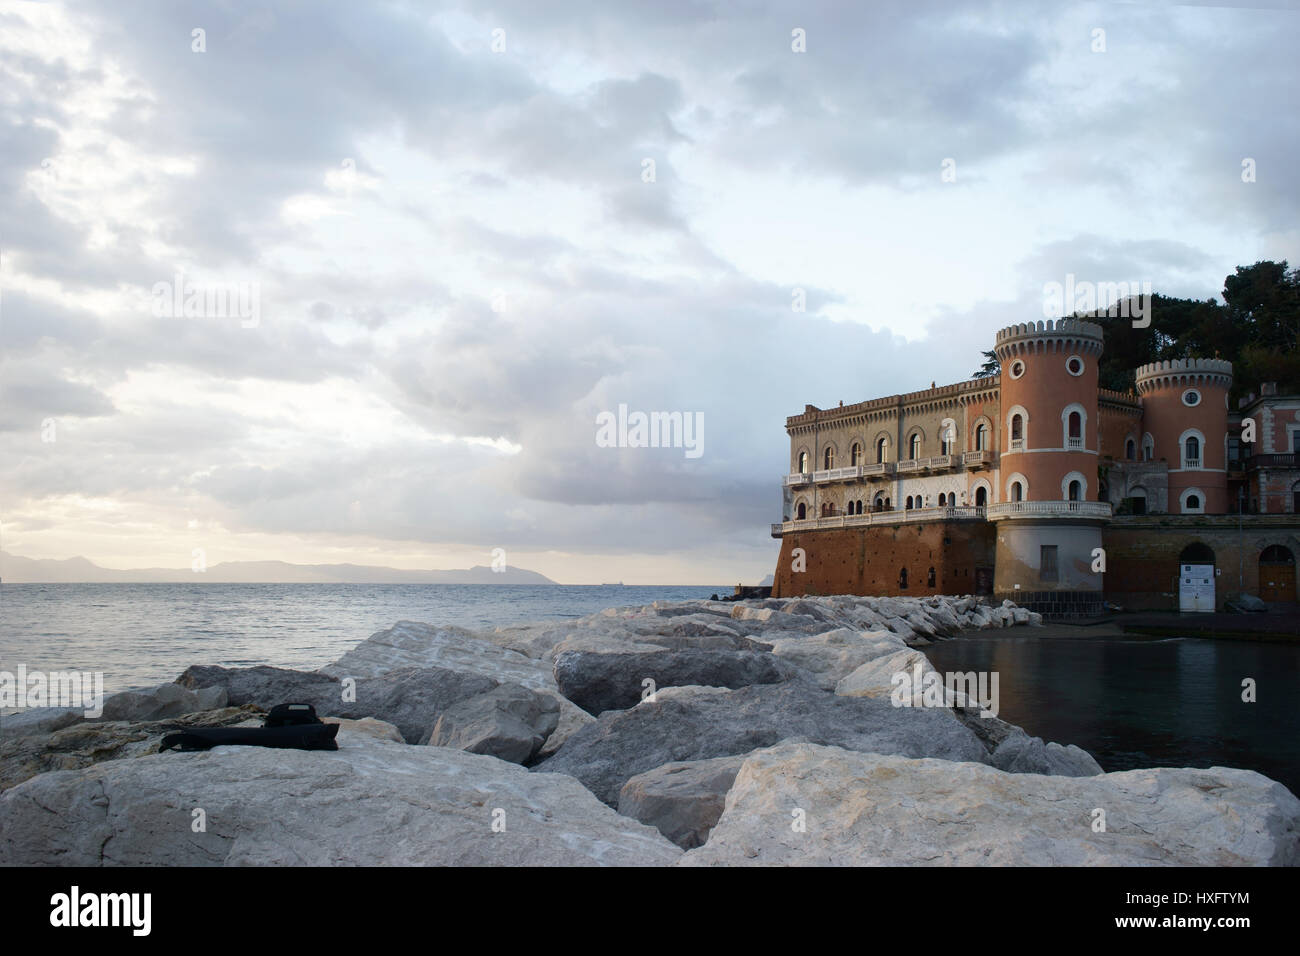 Riva Fiorita Posillipo High Resolution Stock Photography and Images - Alamy